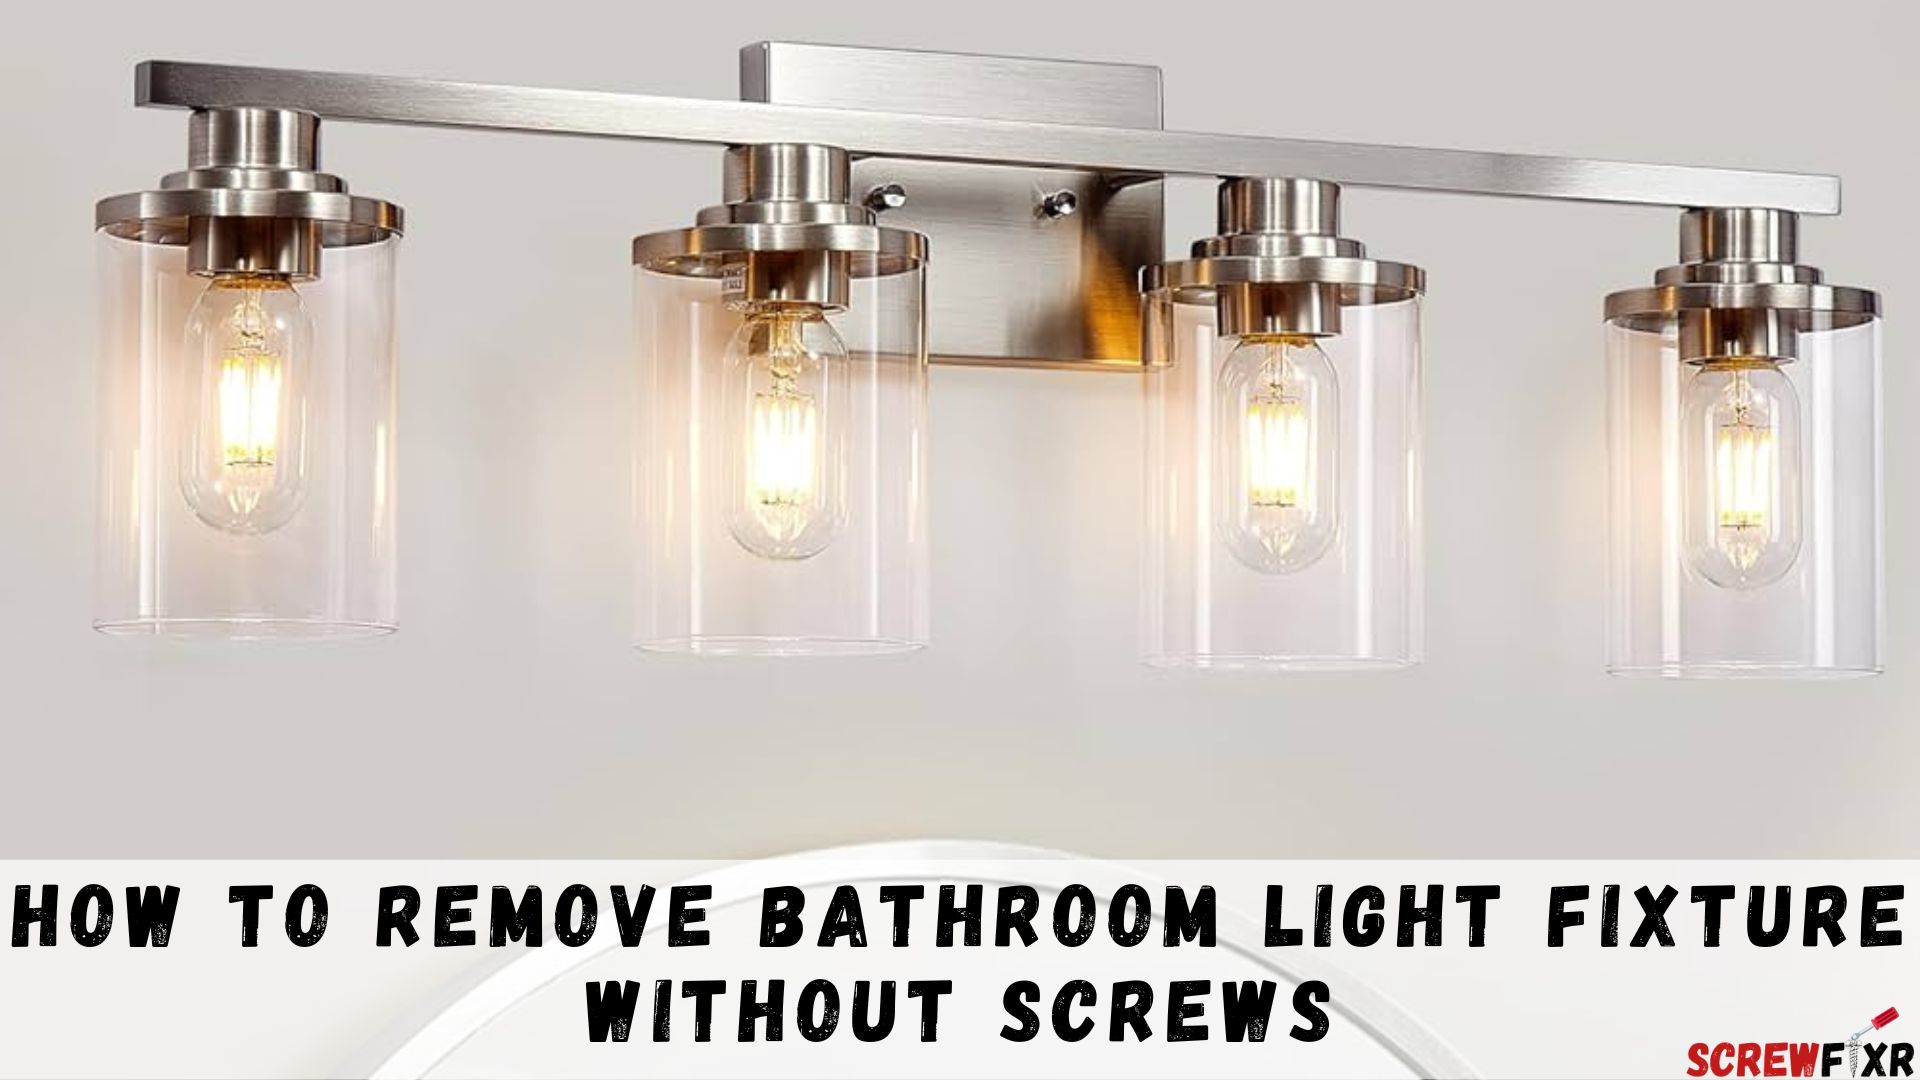 How To Remove Bathroom Light Fixture Without Screws